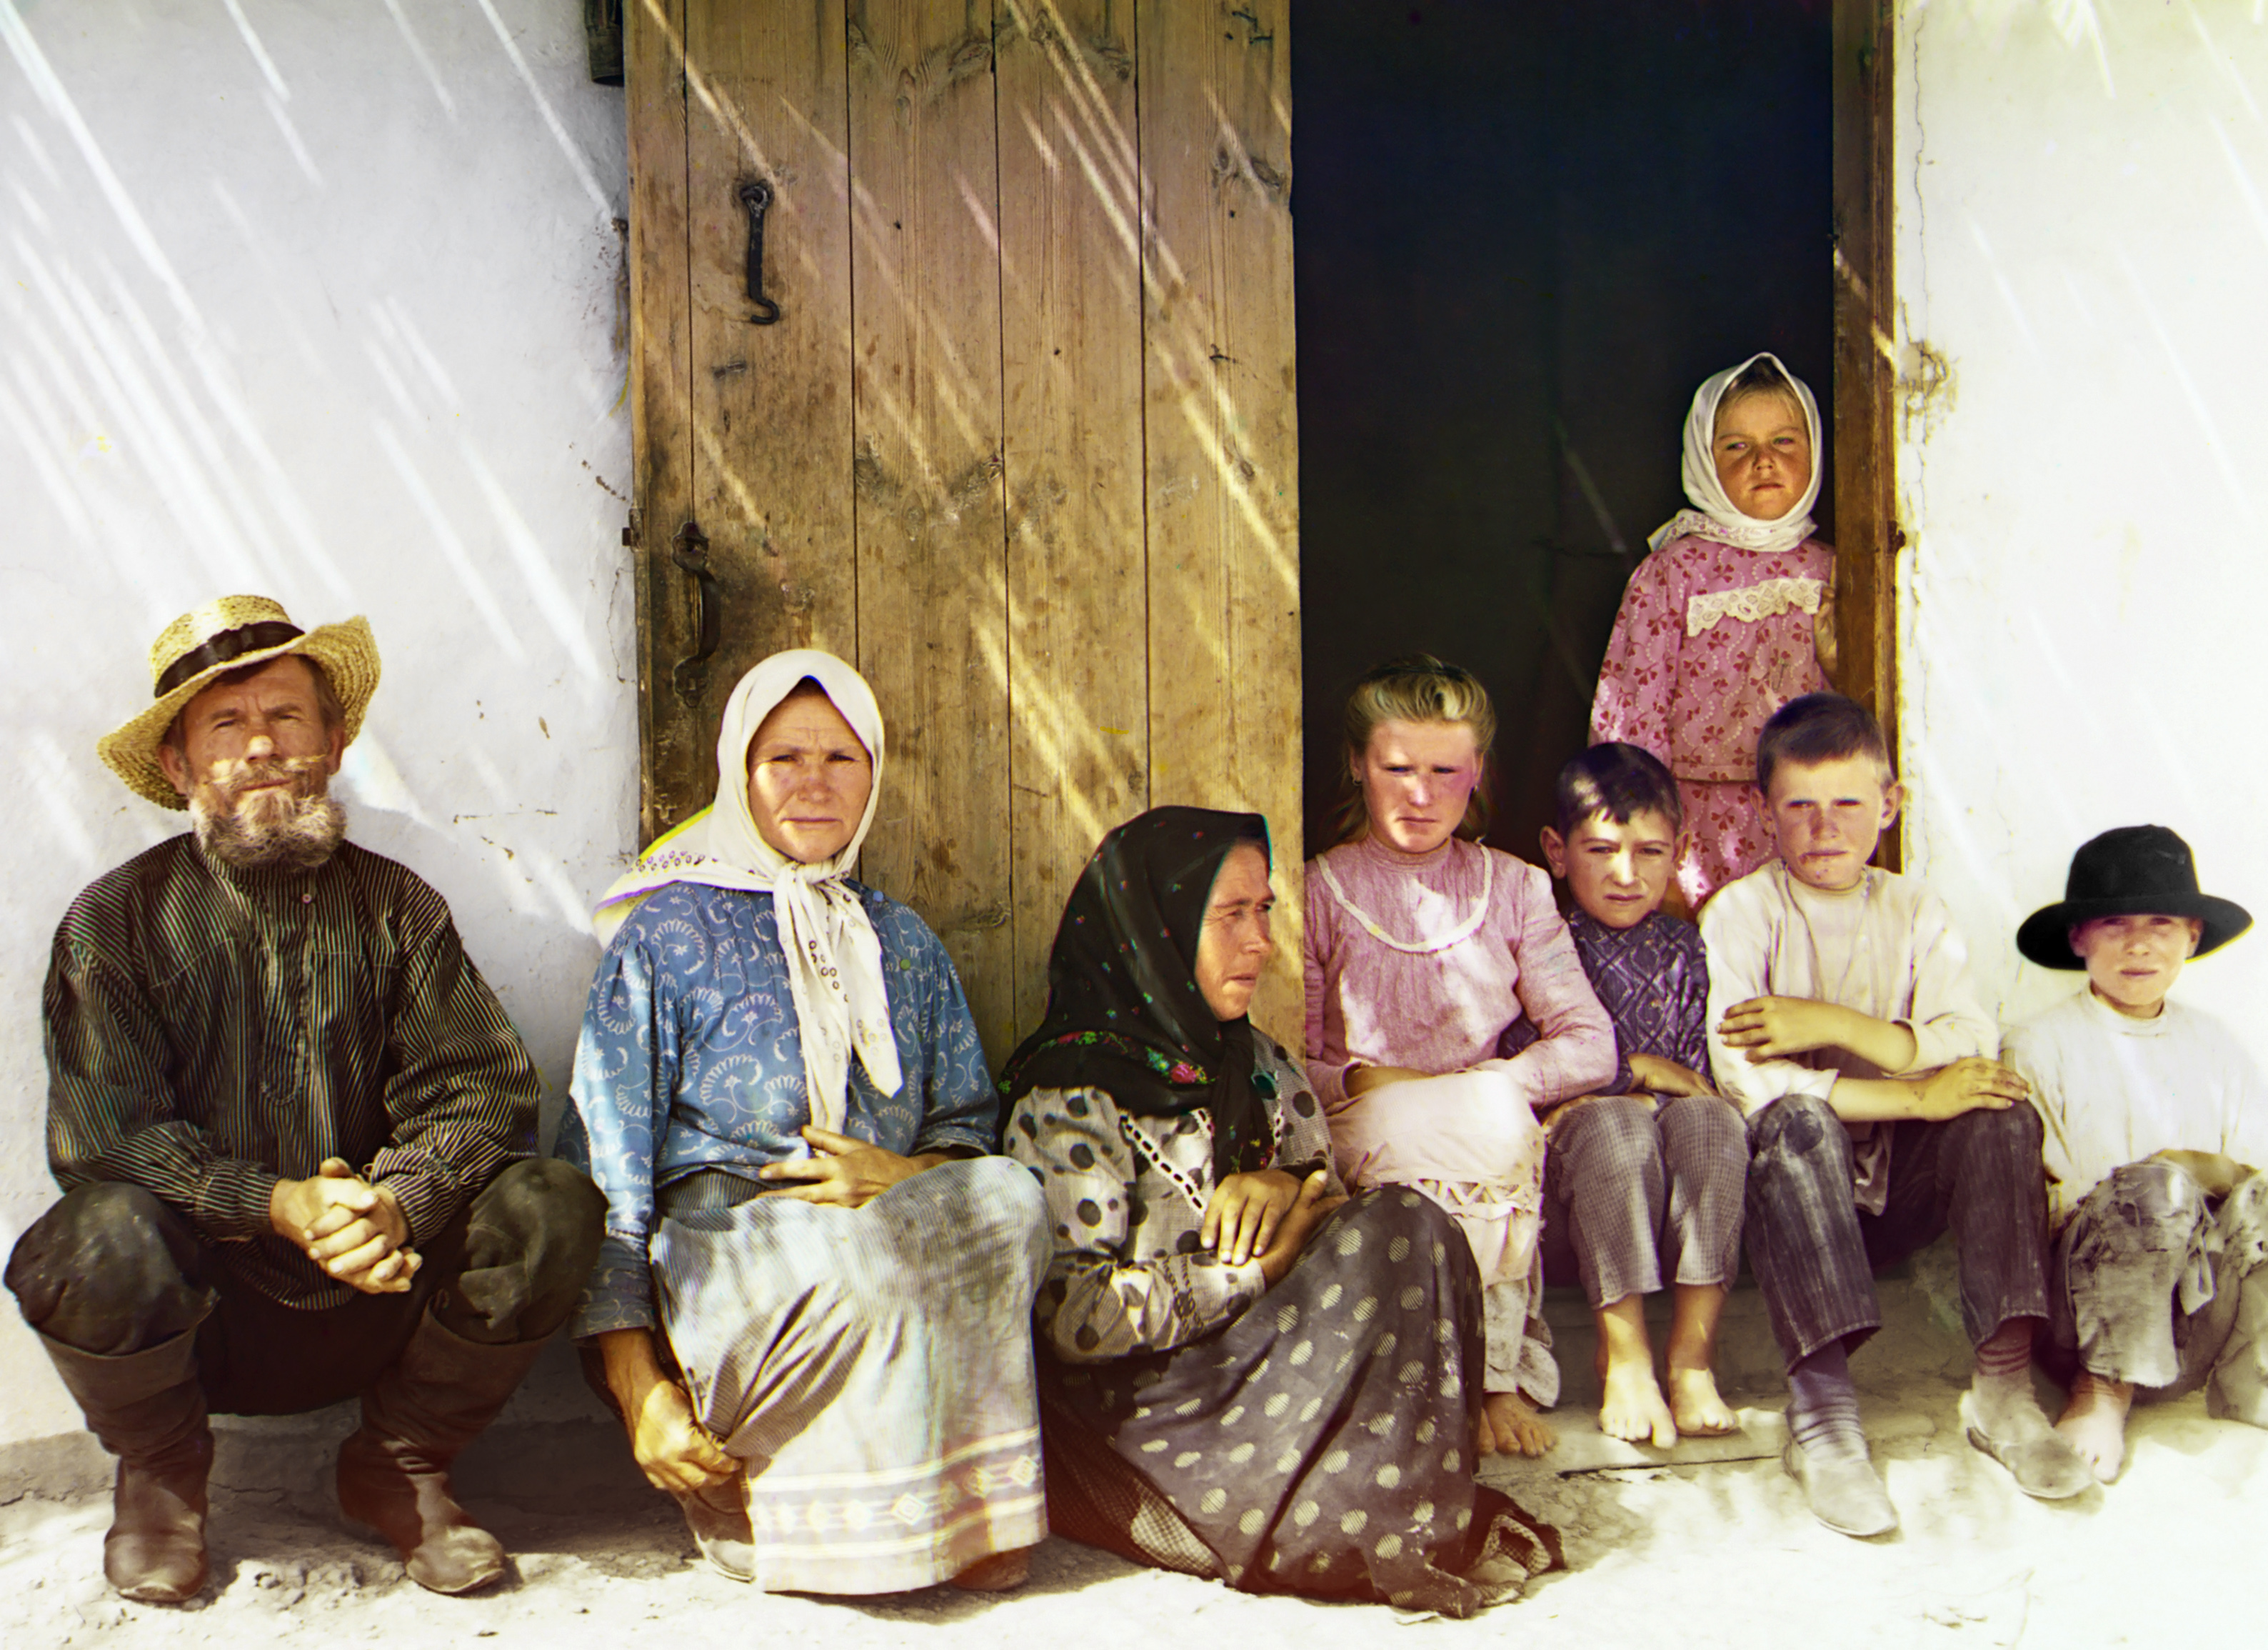 Russian settlers, possibly Molokans, in the Mugan steppe of Azerbaijan by Prokudin-Gorsky